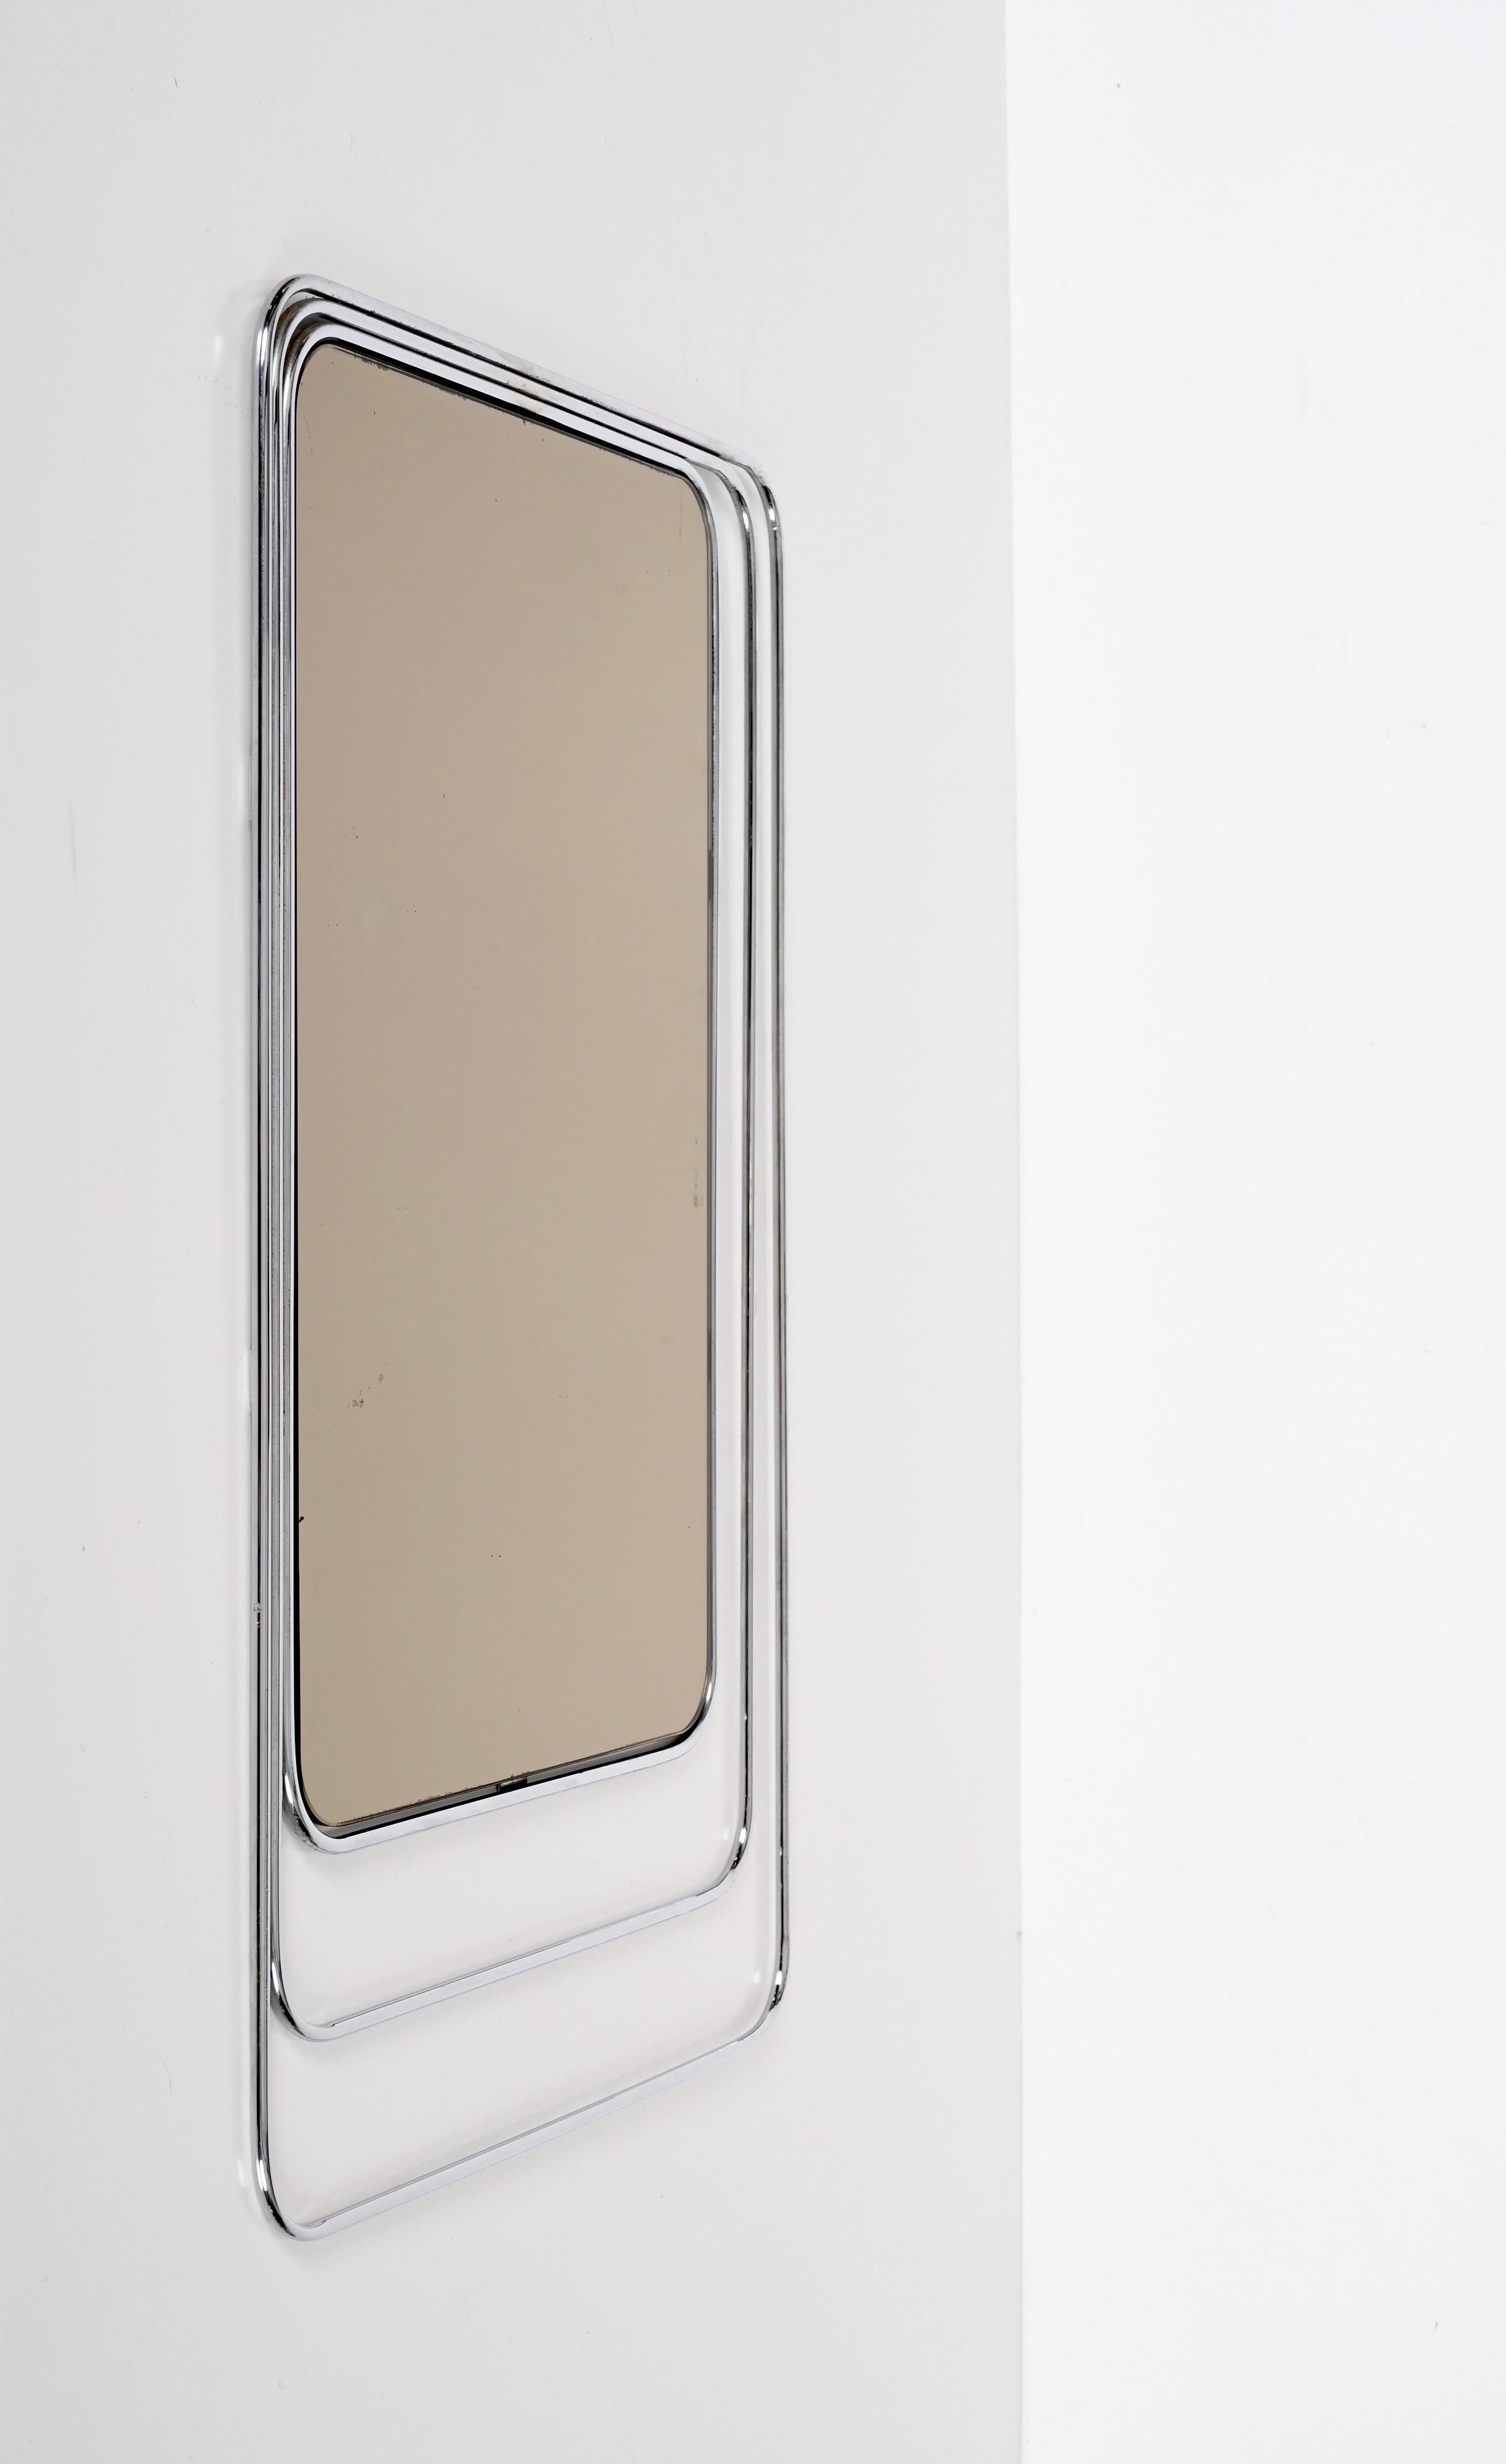 Midcentury Triple Frame Chrome and Bronzed Mirror, Verner Panton, Italy, 1980s For Sale 6